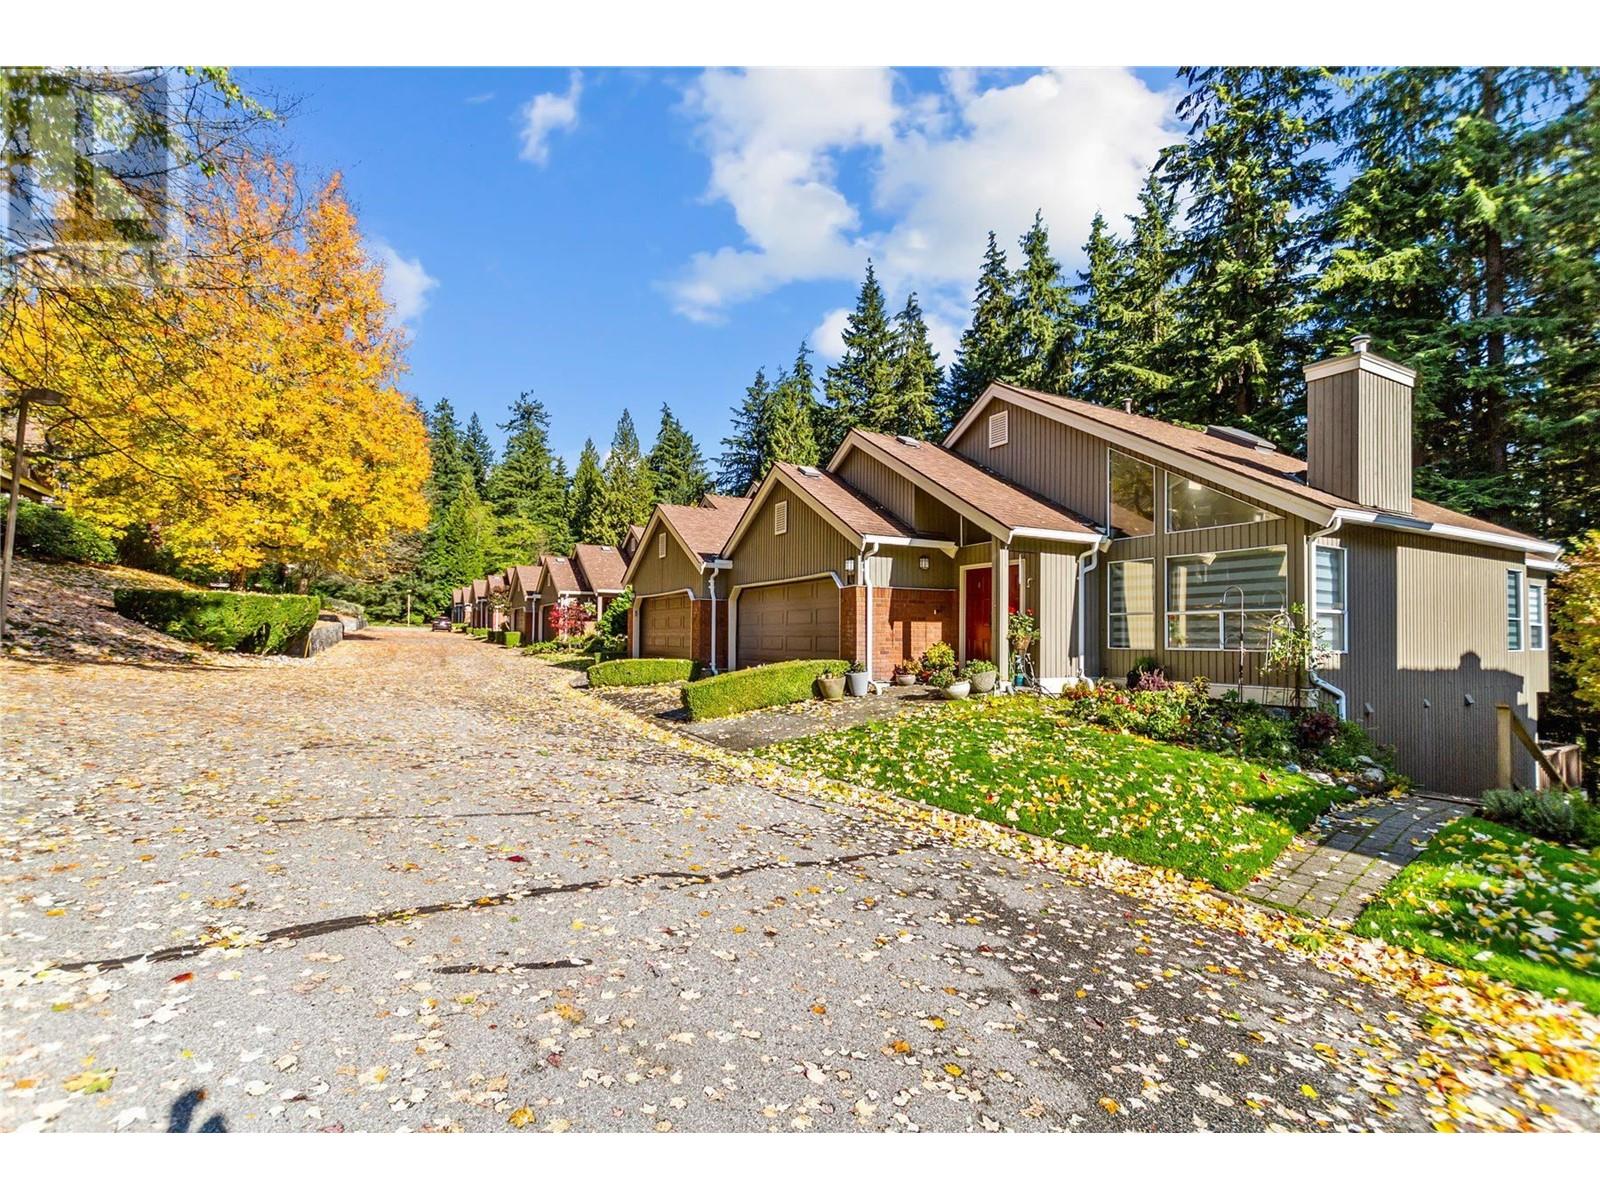 41 4055 INDIAN RIVER DRIVE, north vancouver, British Columbia V7G2R7